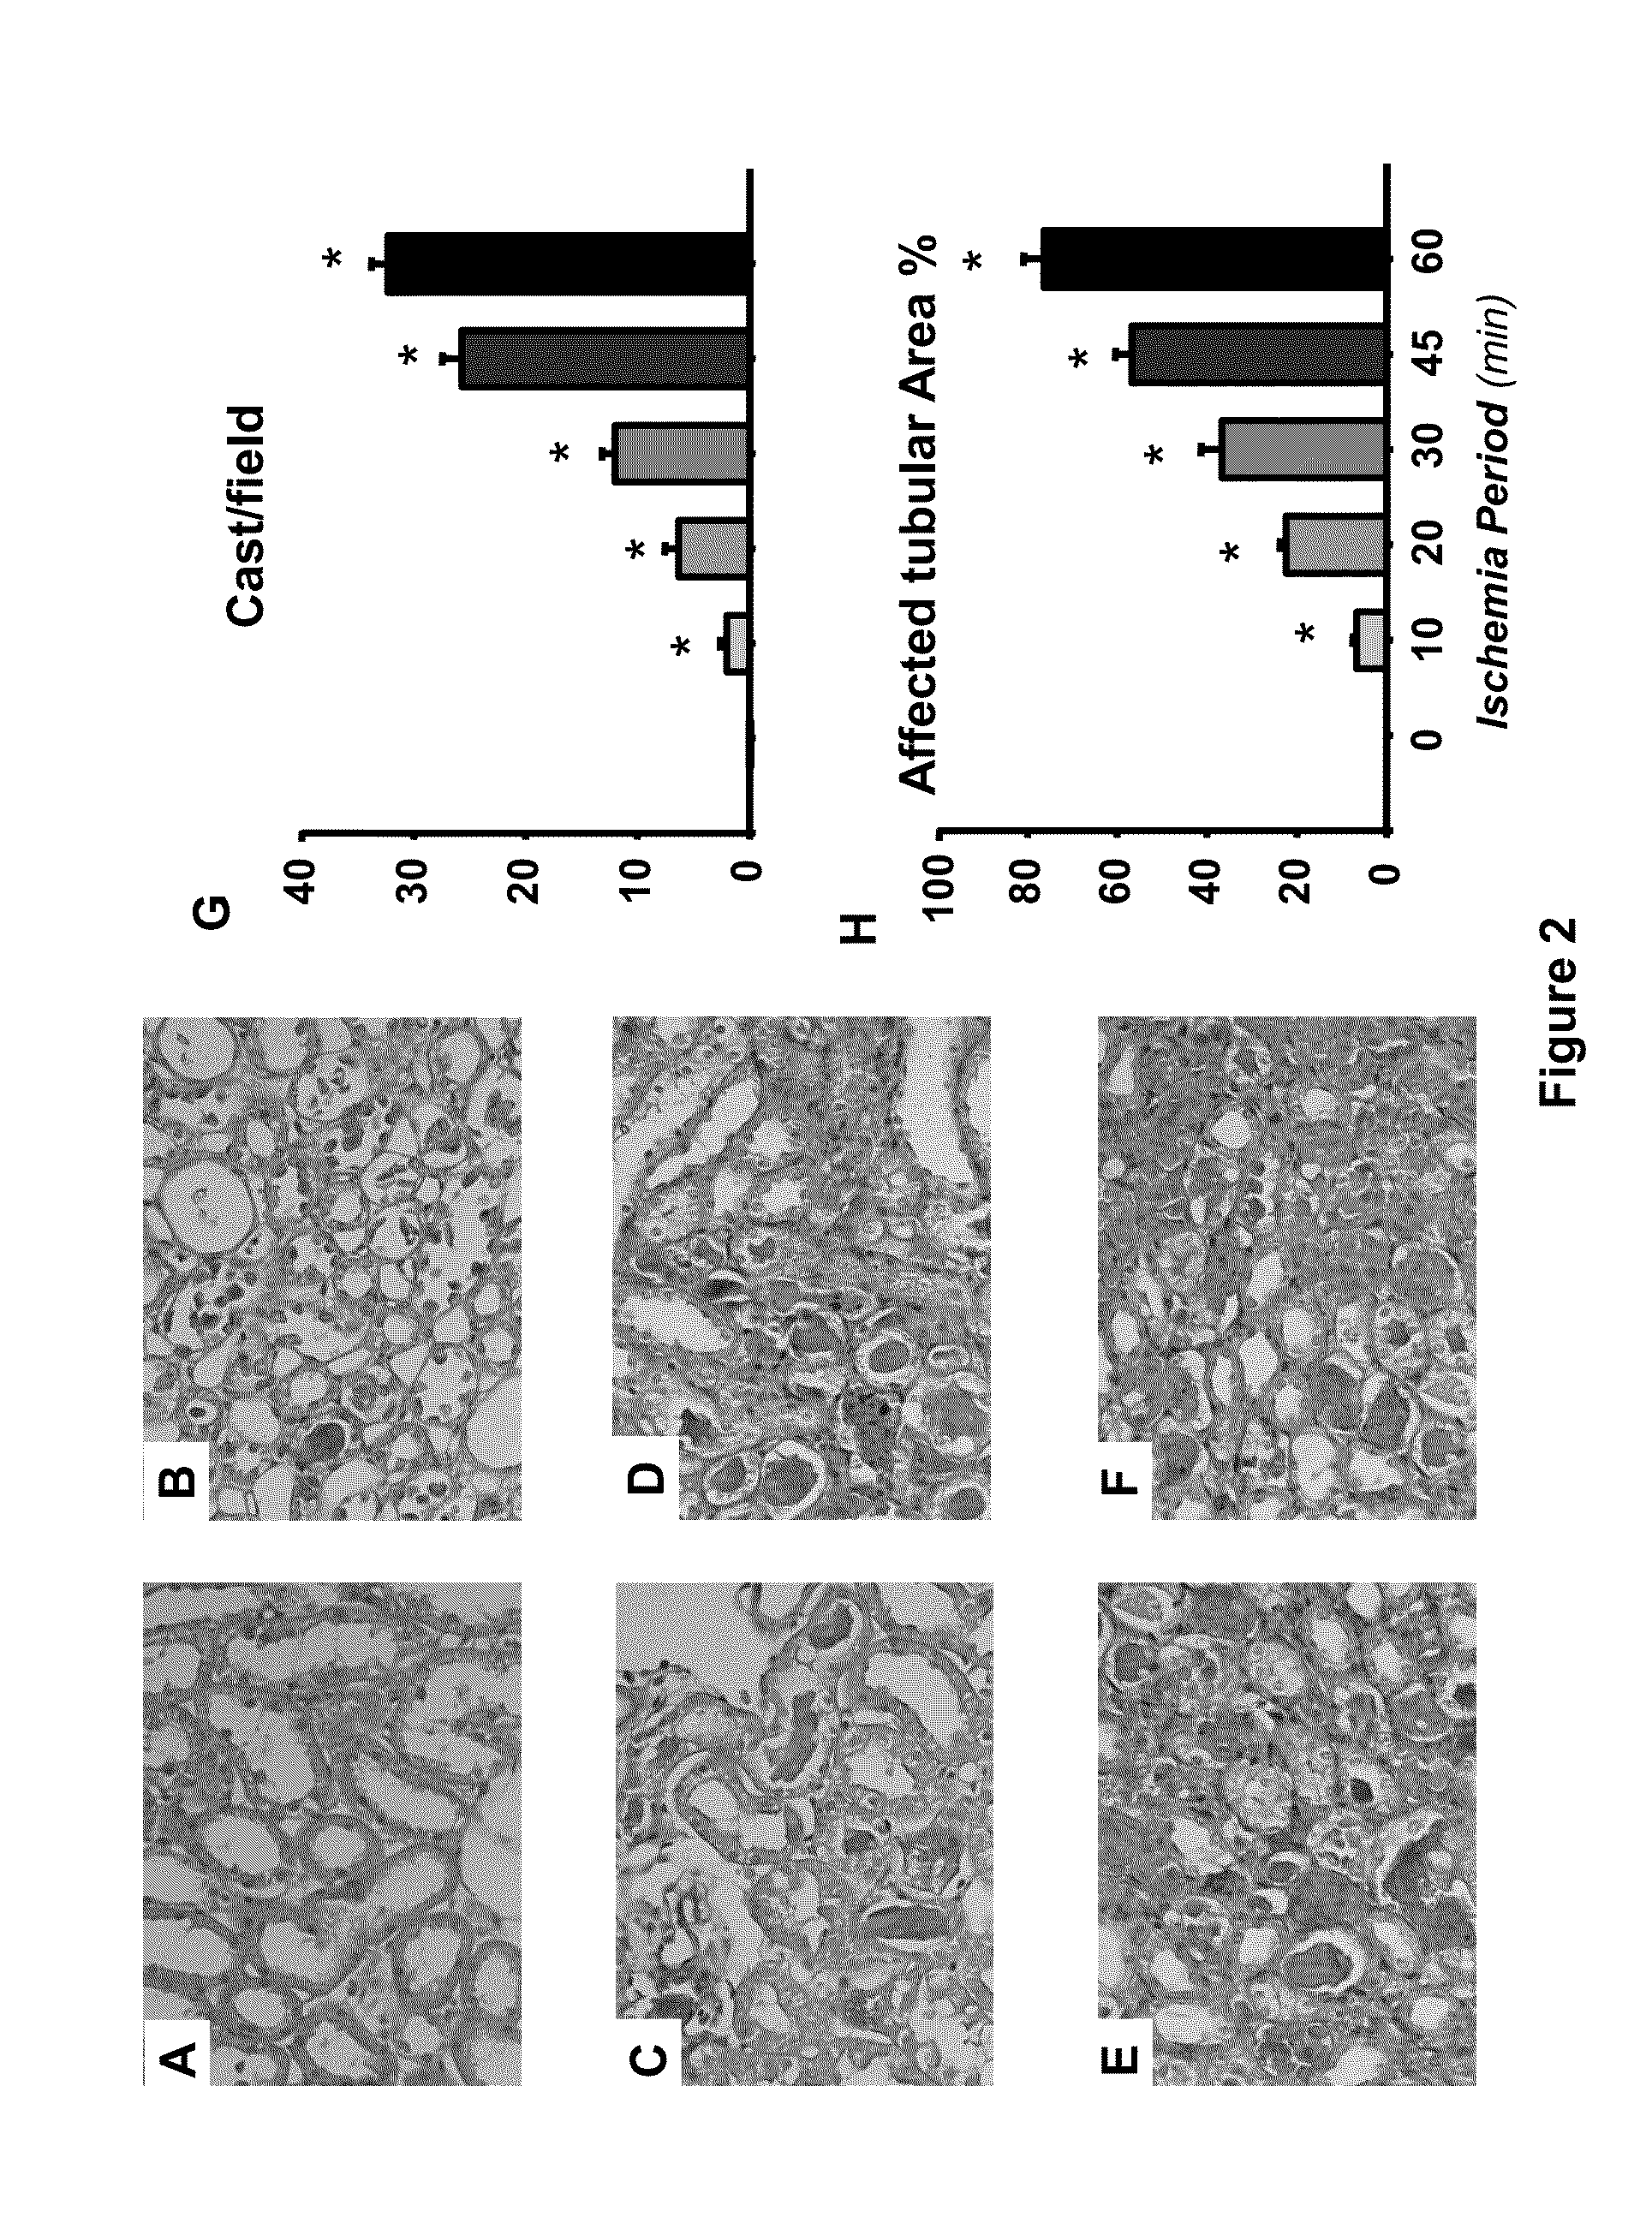 Diagnostic method for detecting acute kidney injury using heat shock protein 72 as a sensitive biomarker